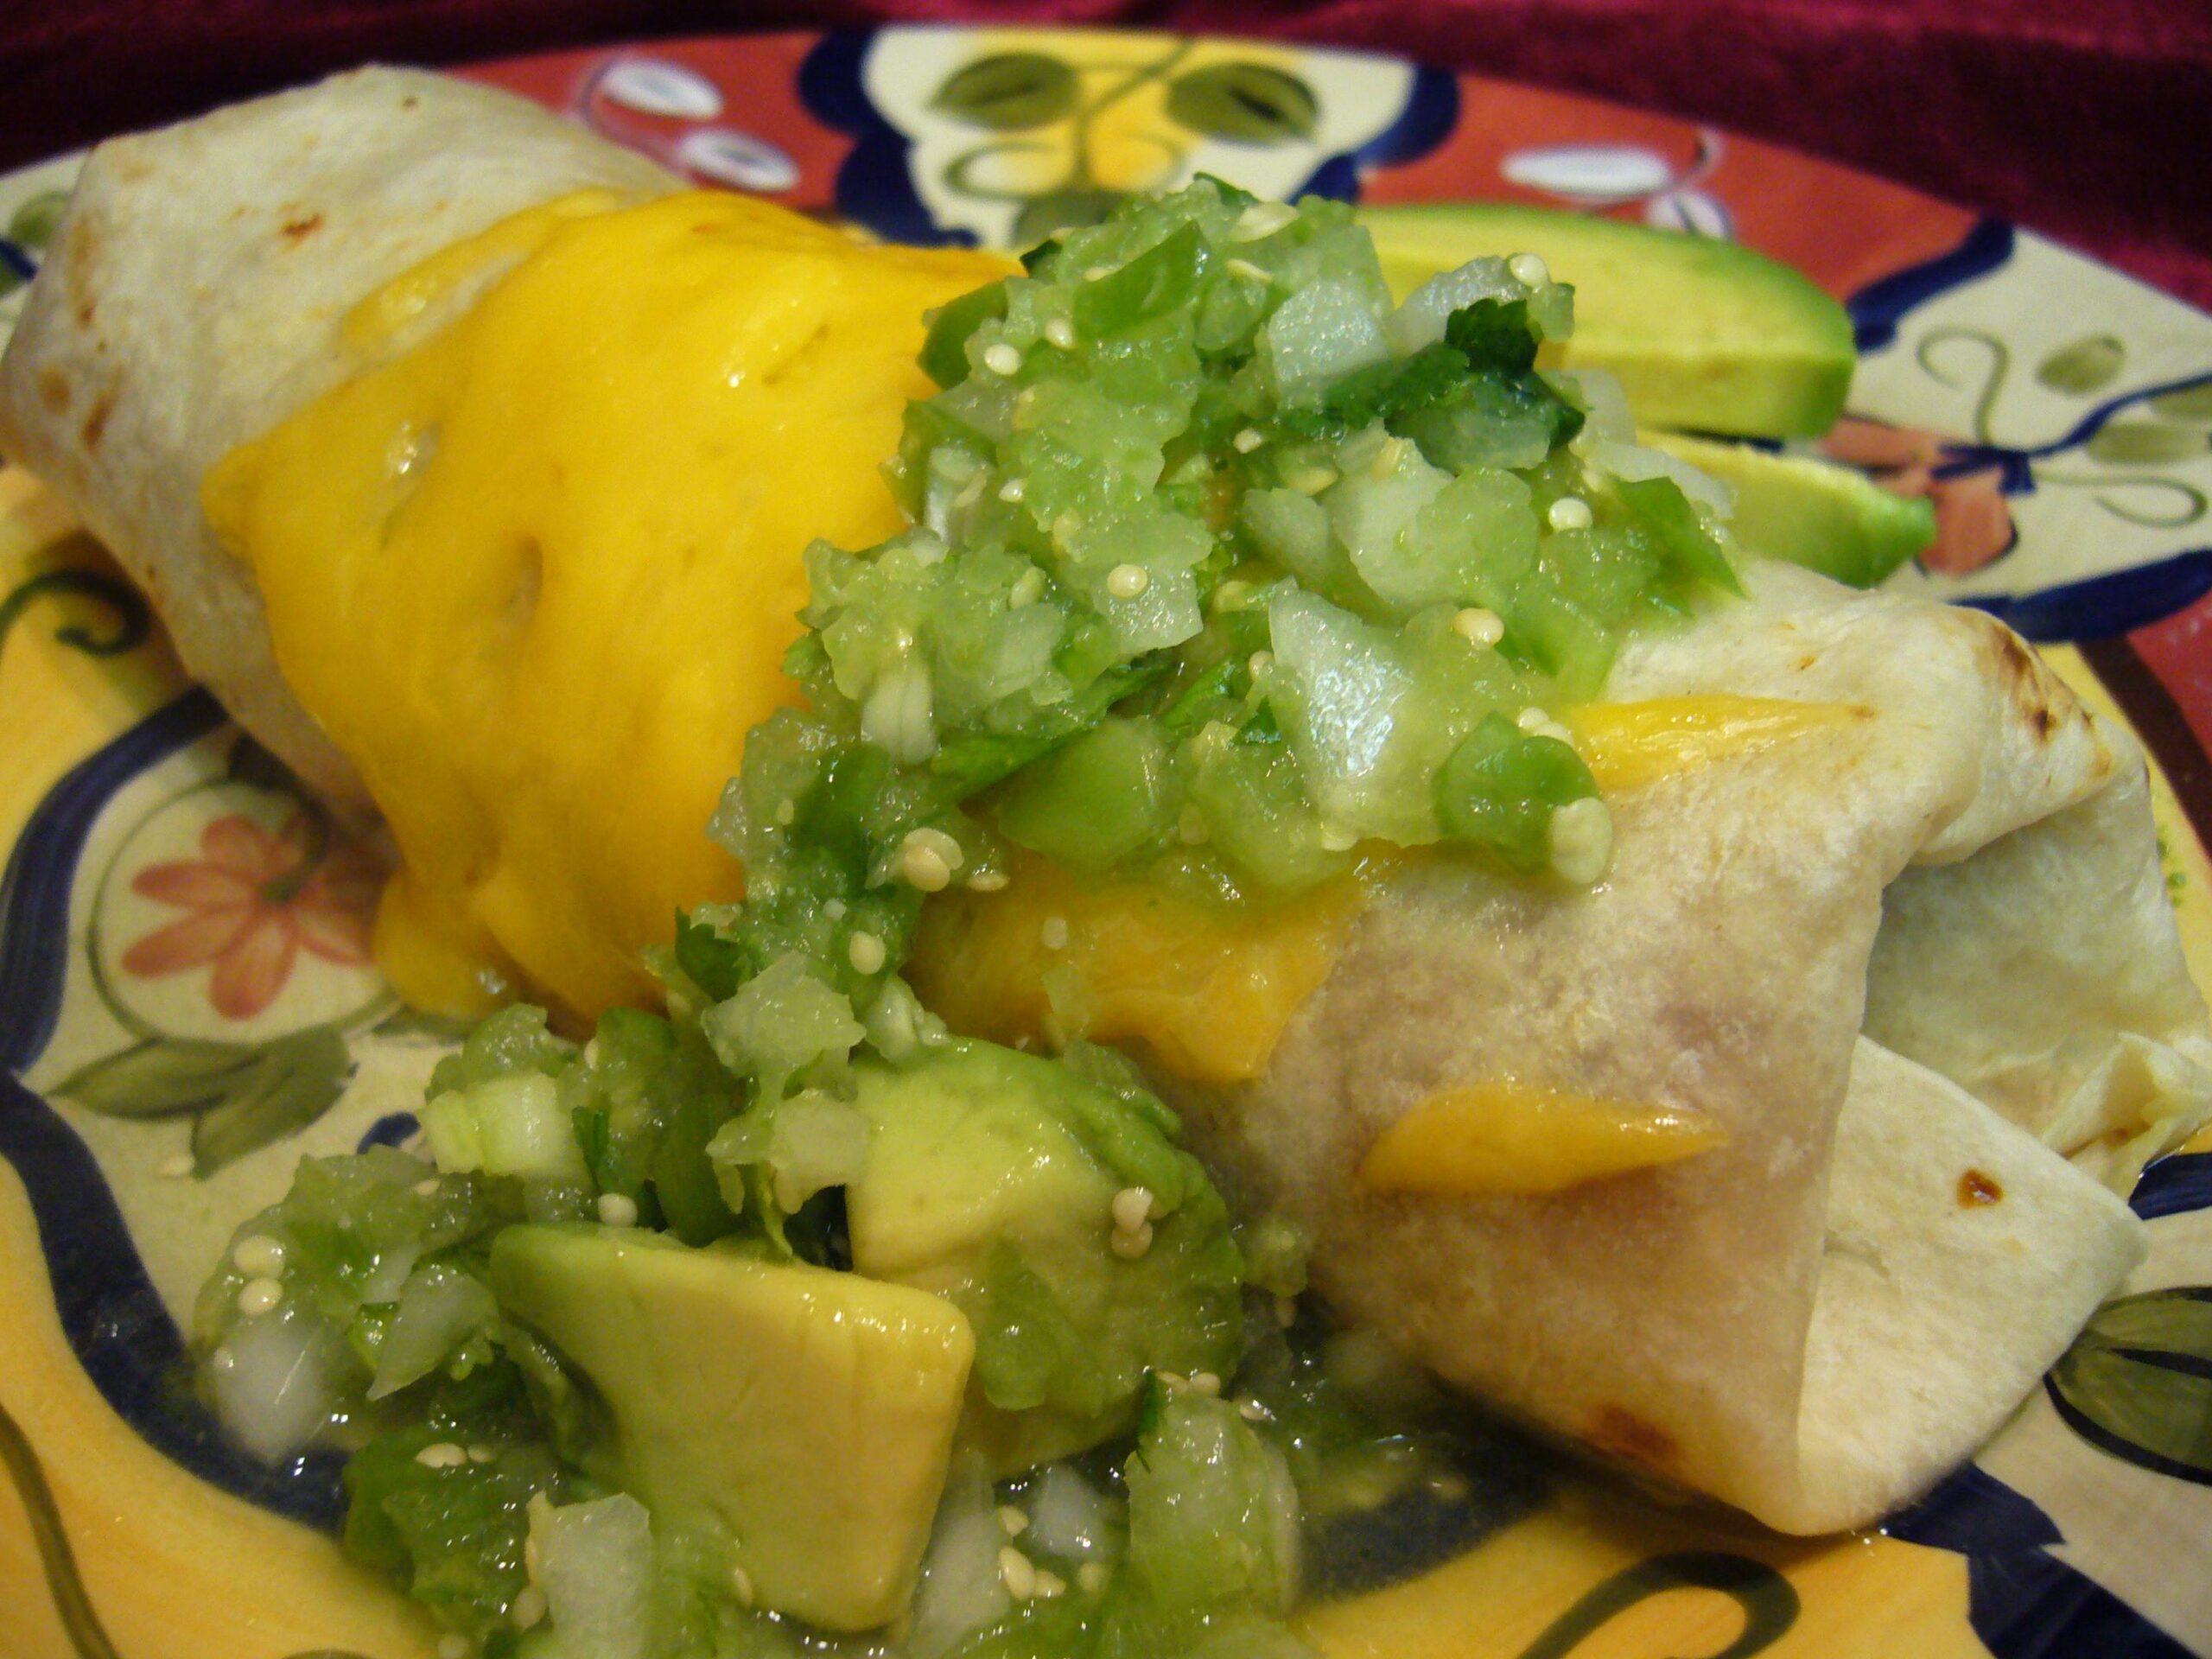  These burritos are packed with bold flavors and vibrant colors!